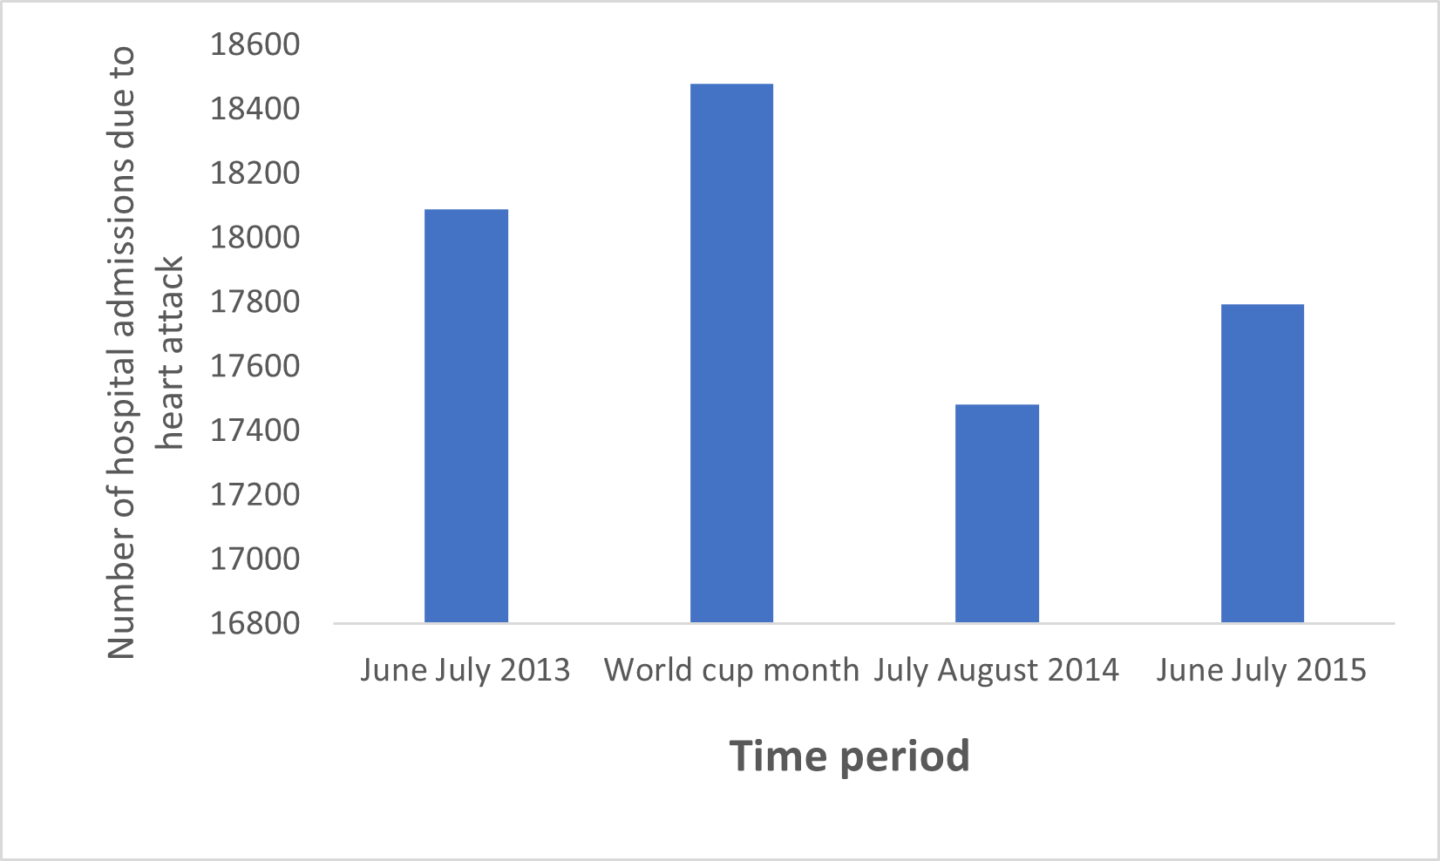 Bar graph showing number of hospital admissions due to heart attacks during he four time period. The fif world cup ha 184000 and it the tallest bar. The month after the world cup is the shortest bar